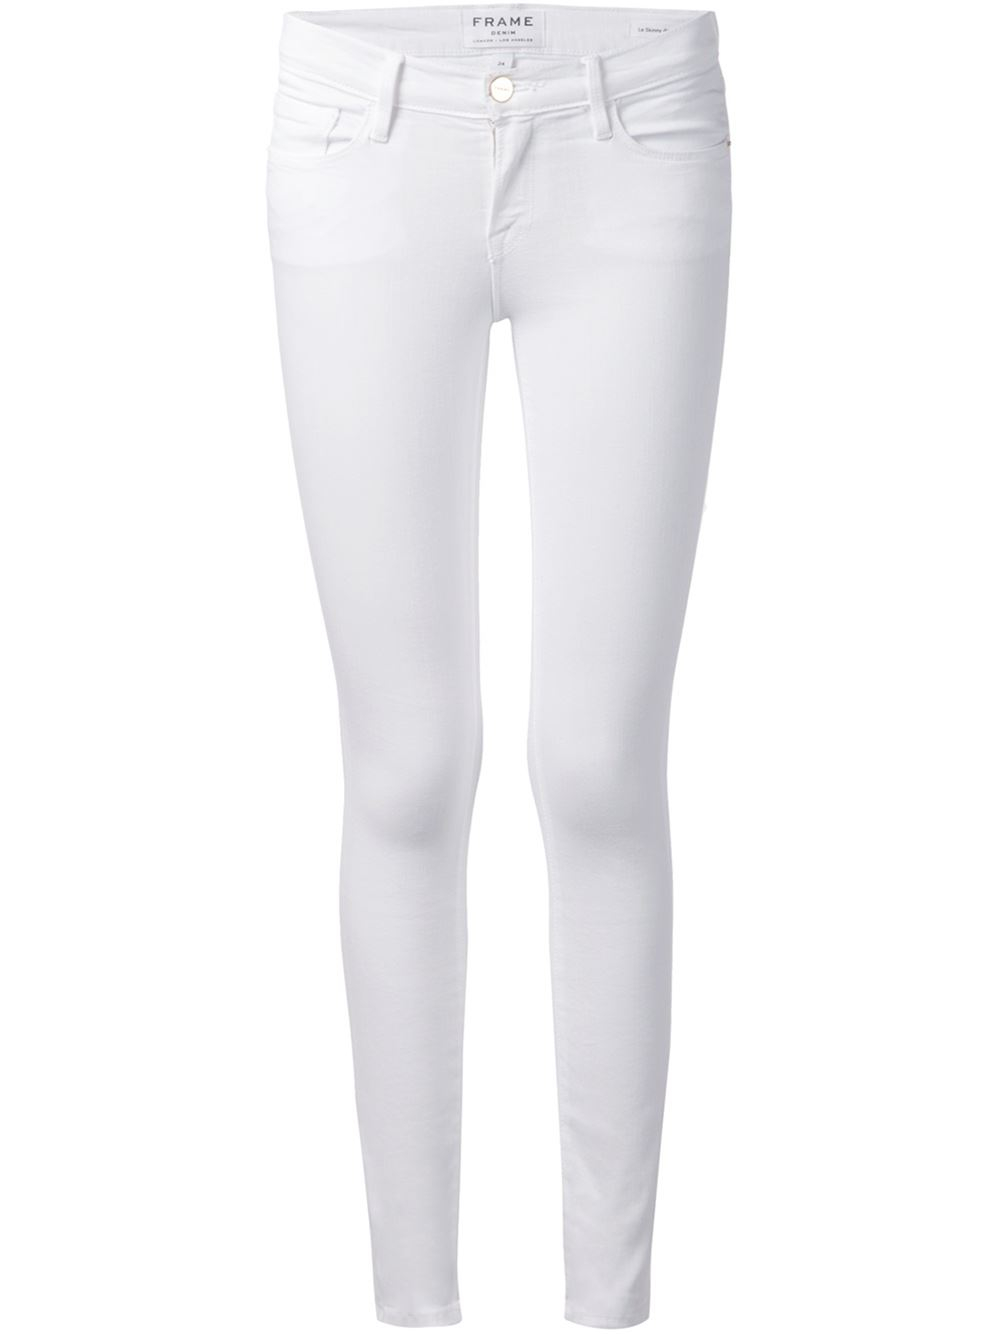 Frame Cropped Skinny Jeans in White - Save 60% | Lyst